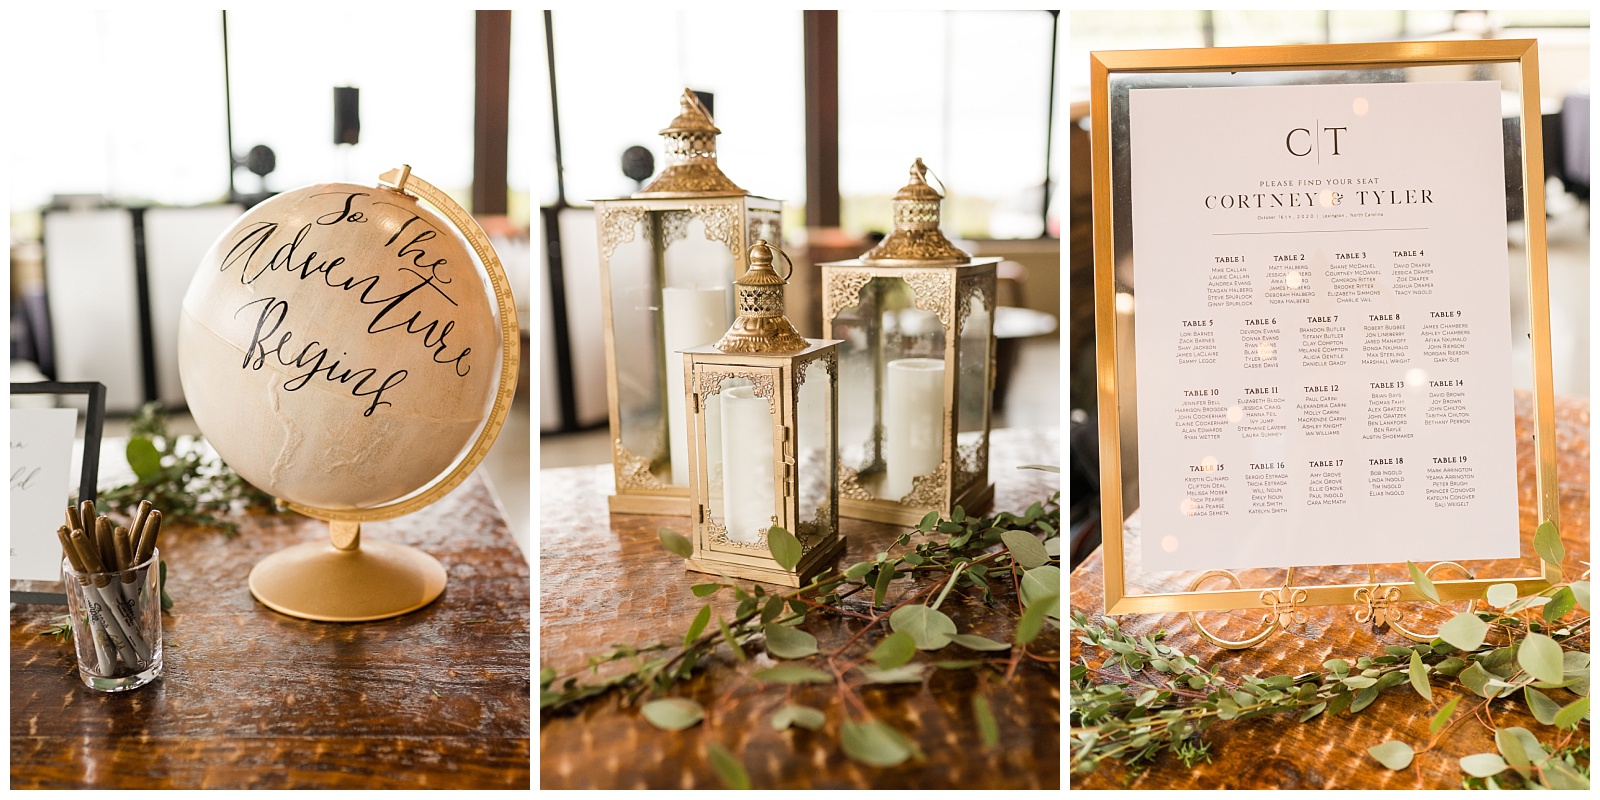 the adventure begins wedding globe guest book in gold with script font.